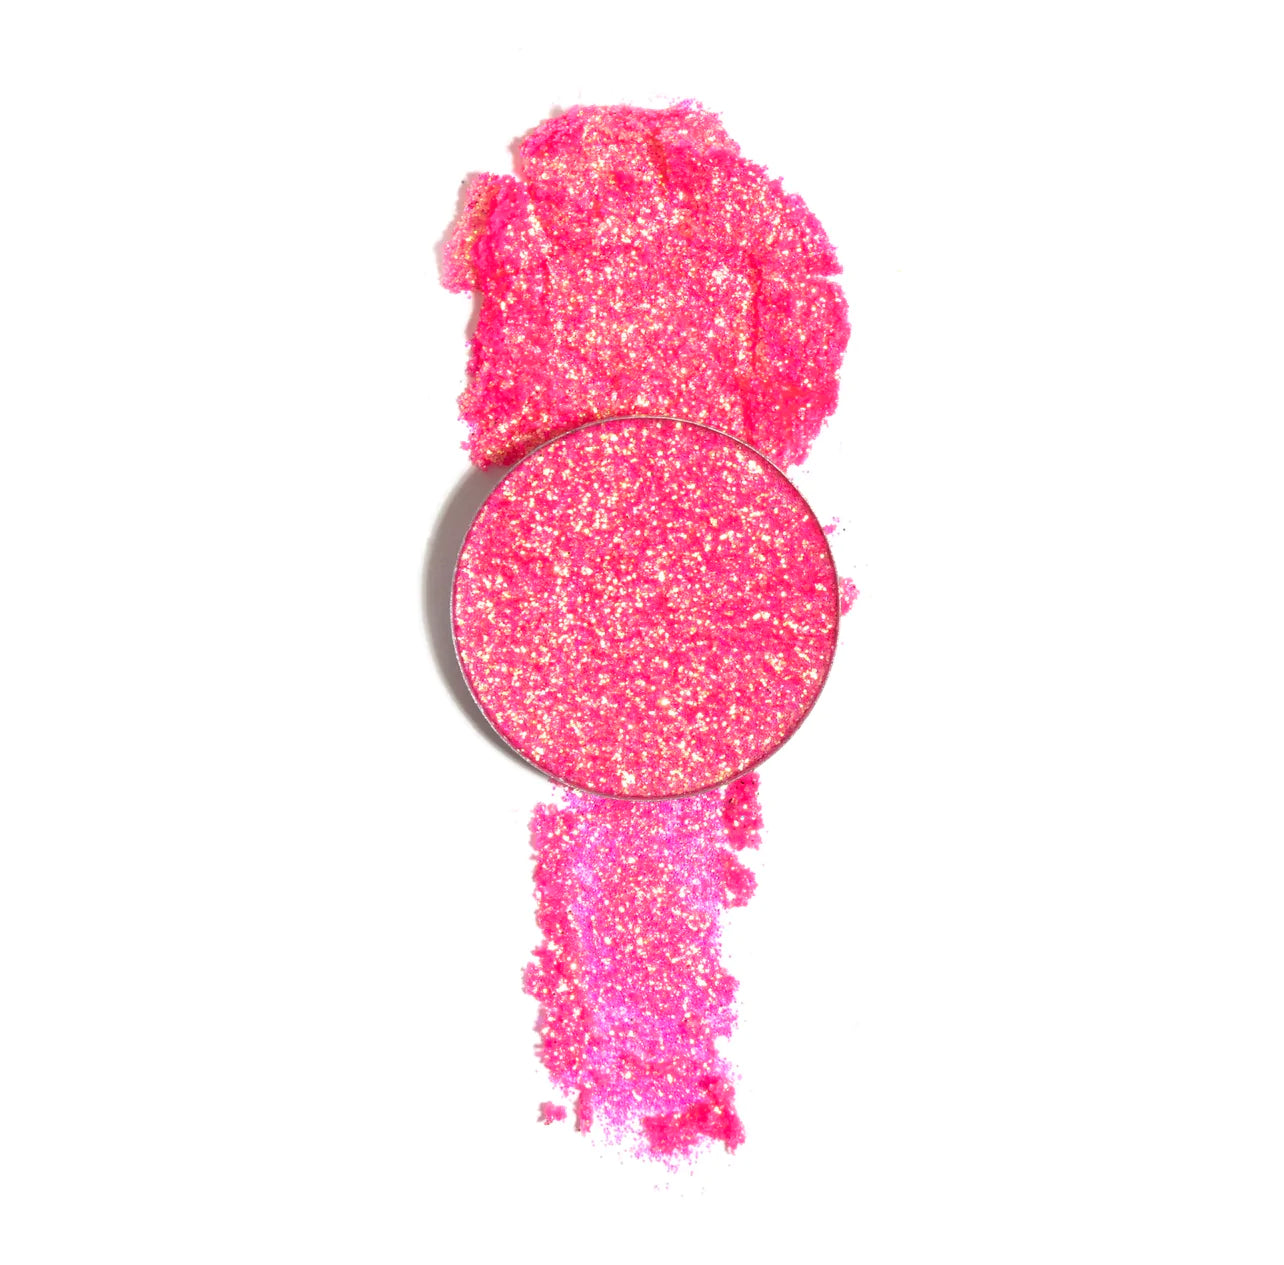 With Love Cosmetics Pressed Glitters - Pink Lady